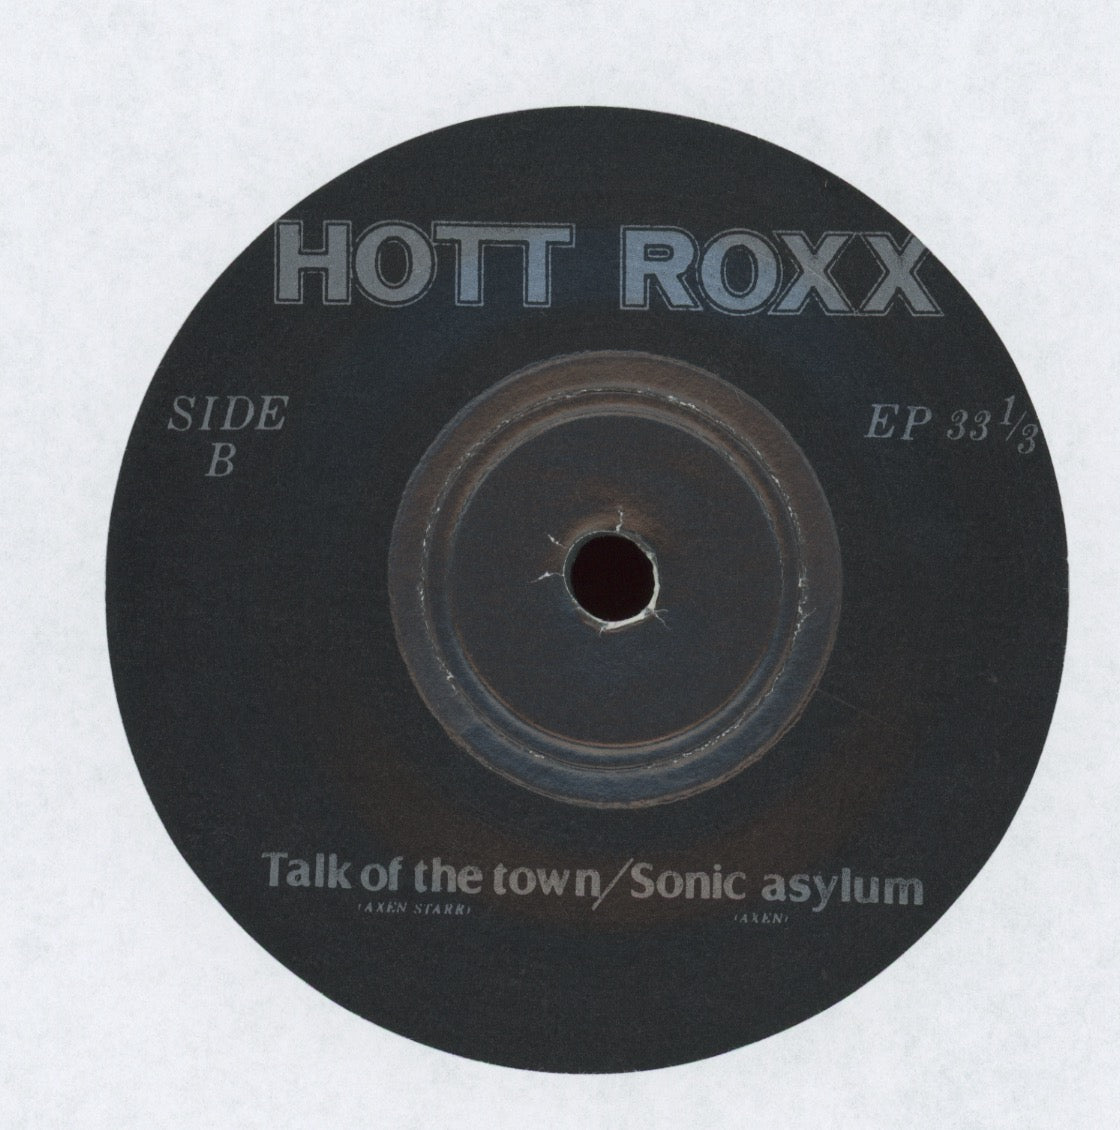 Hott Roxx - Point Blank Private Press 7" EP With Picture Sleeve